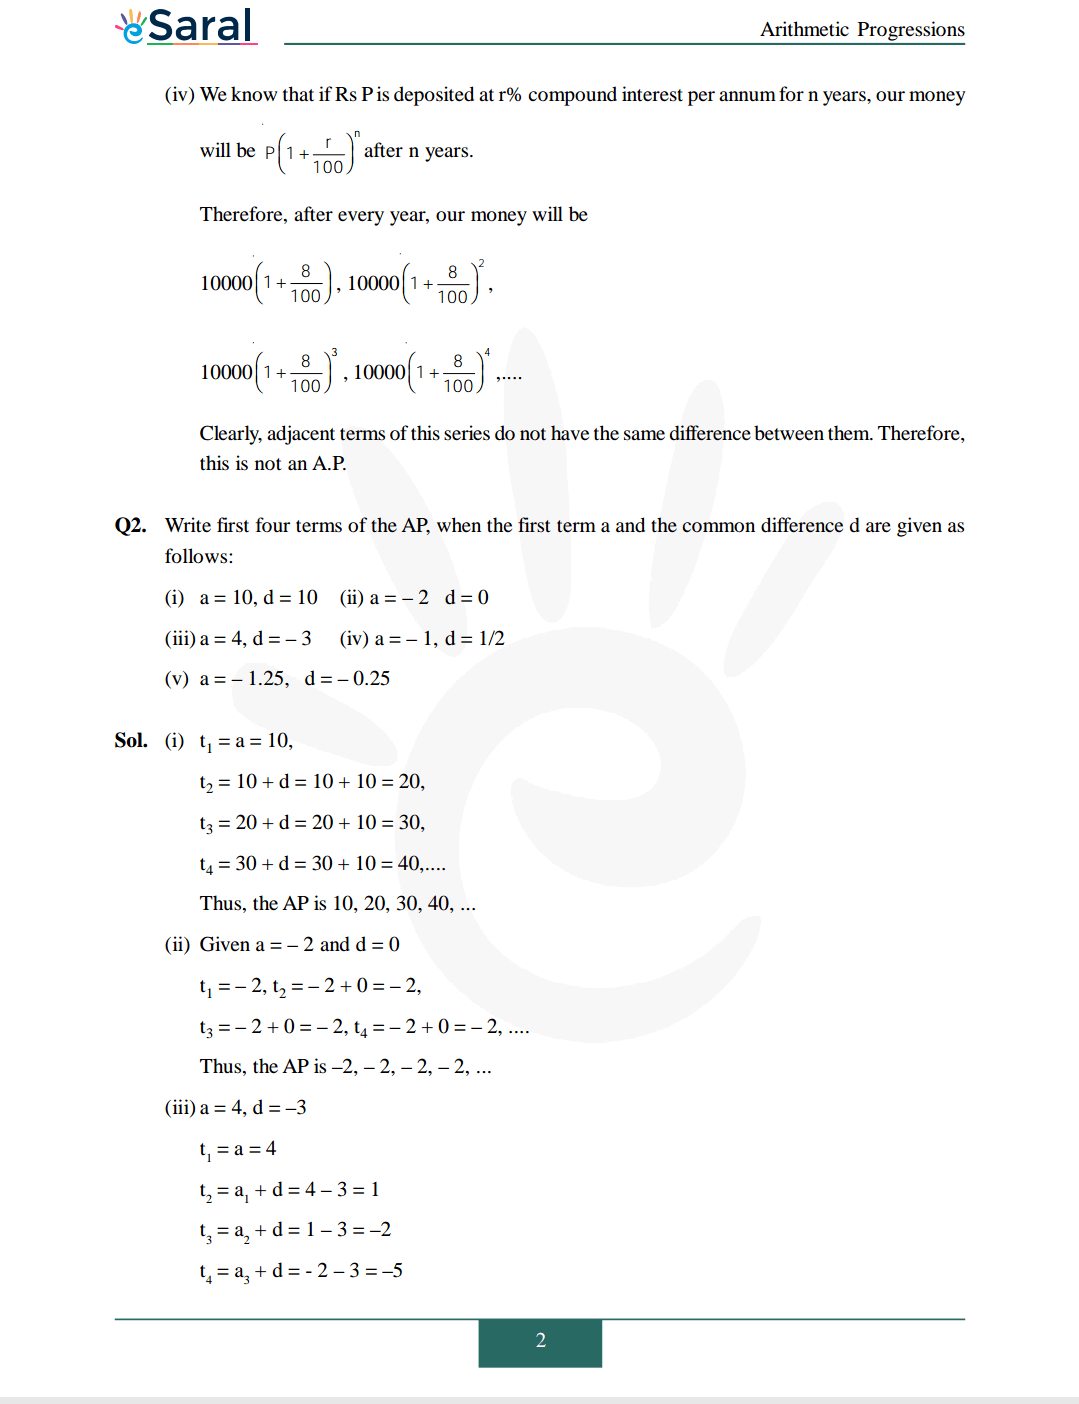 Class 10 Maths Chapter 5 exercise 5.1 solutions Image 2